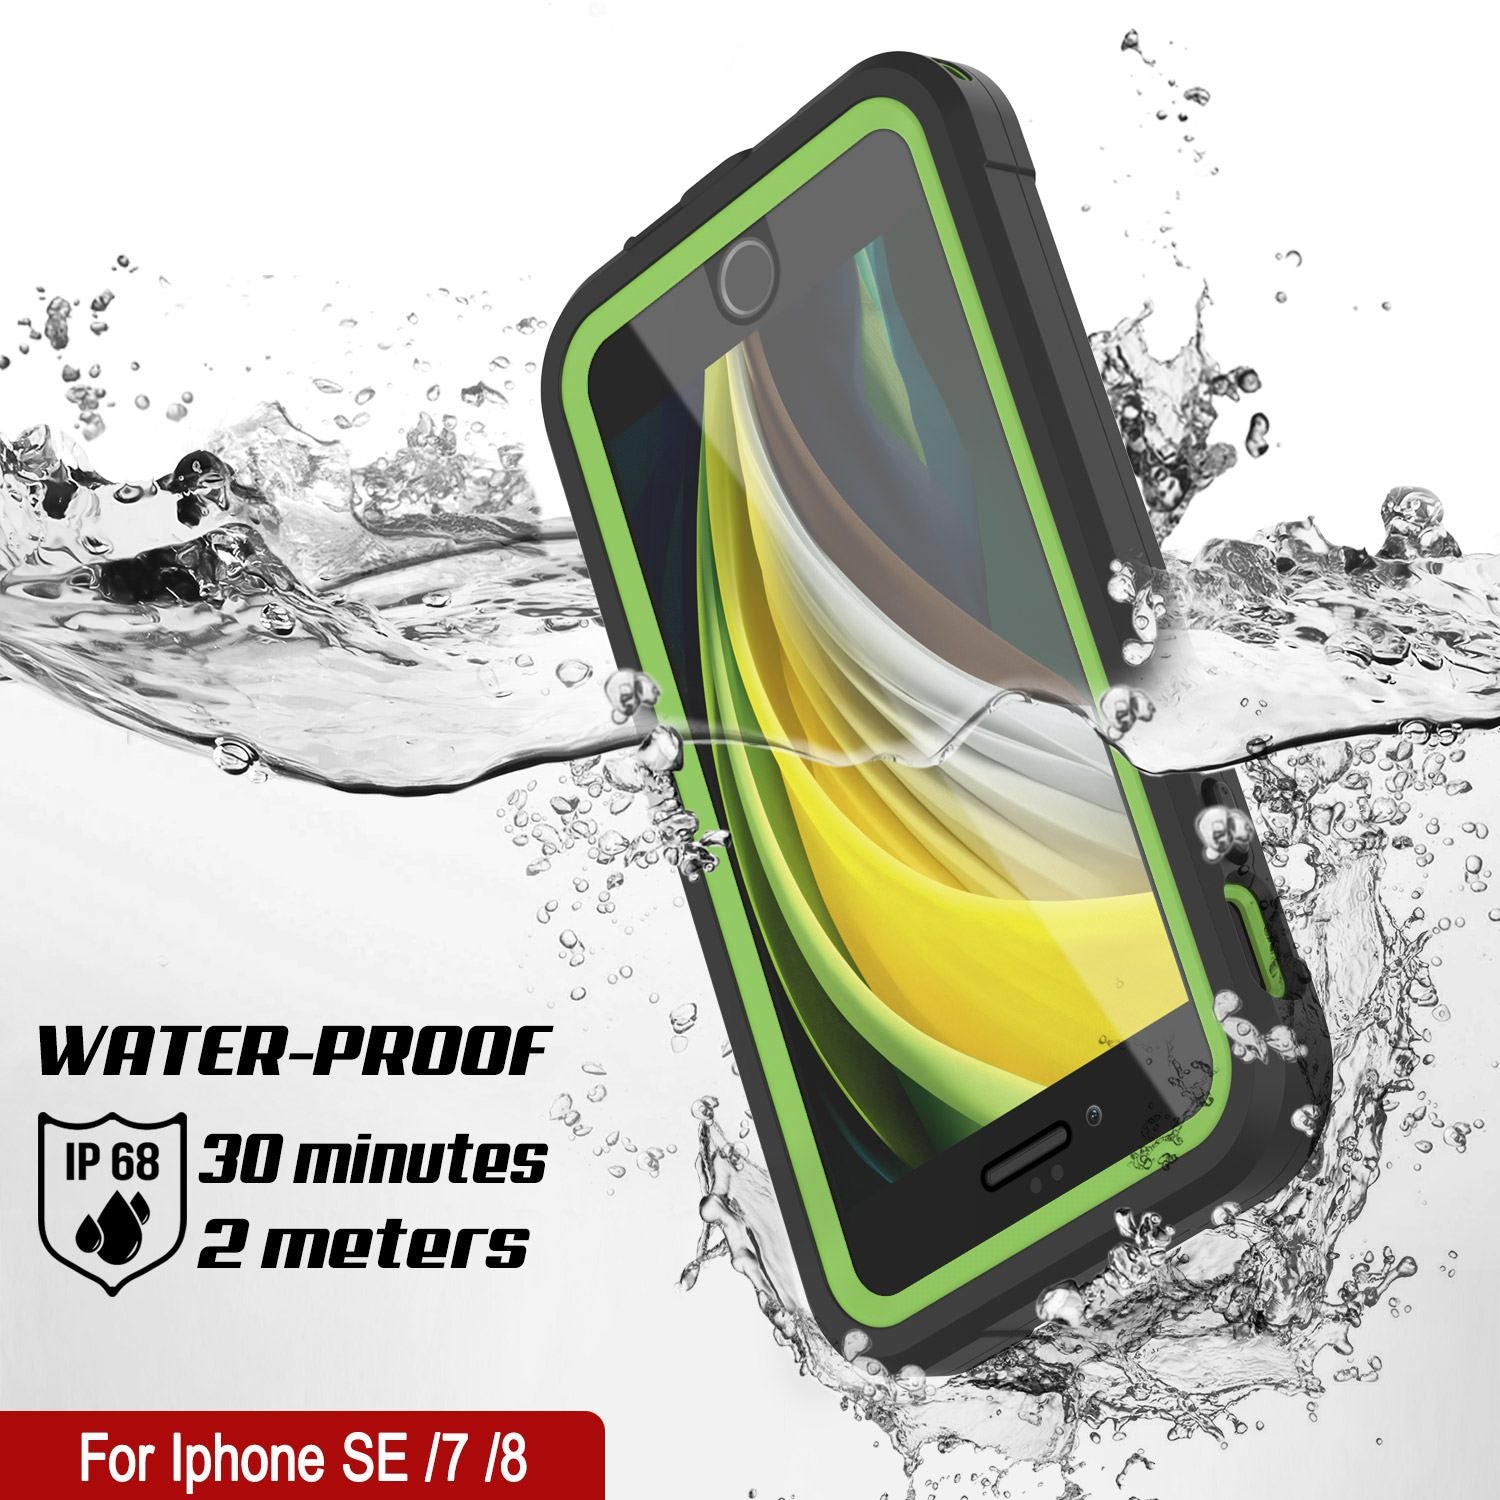 iPhone SE (4.7") Waterproof IP68 Case, Punkcase [Green]  [Maximus Series] [Slim Fit] [IP68 Certified] [Shockresistant] Clear Armor Cover with Screen Protector | Ultimate Protection